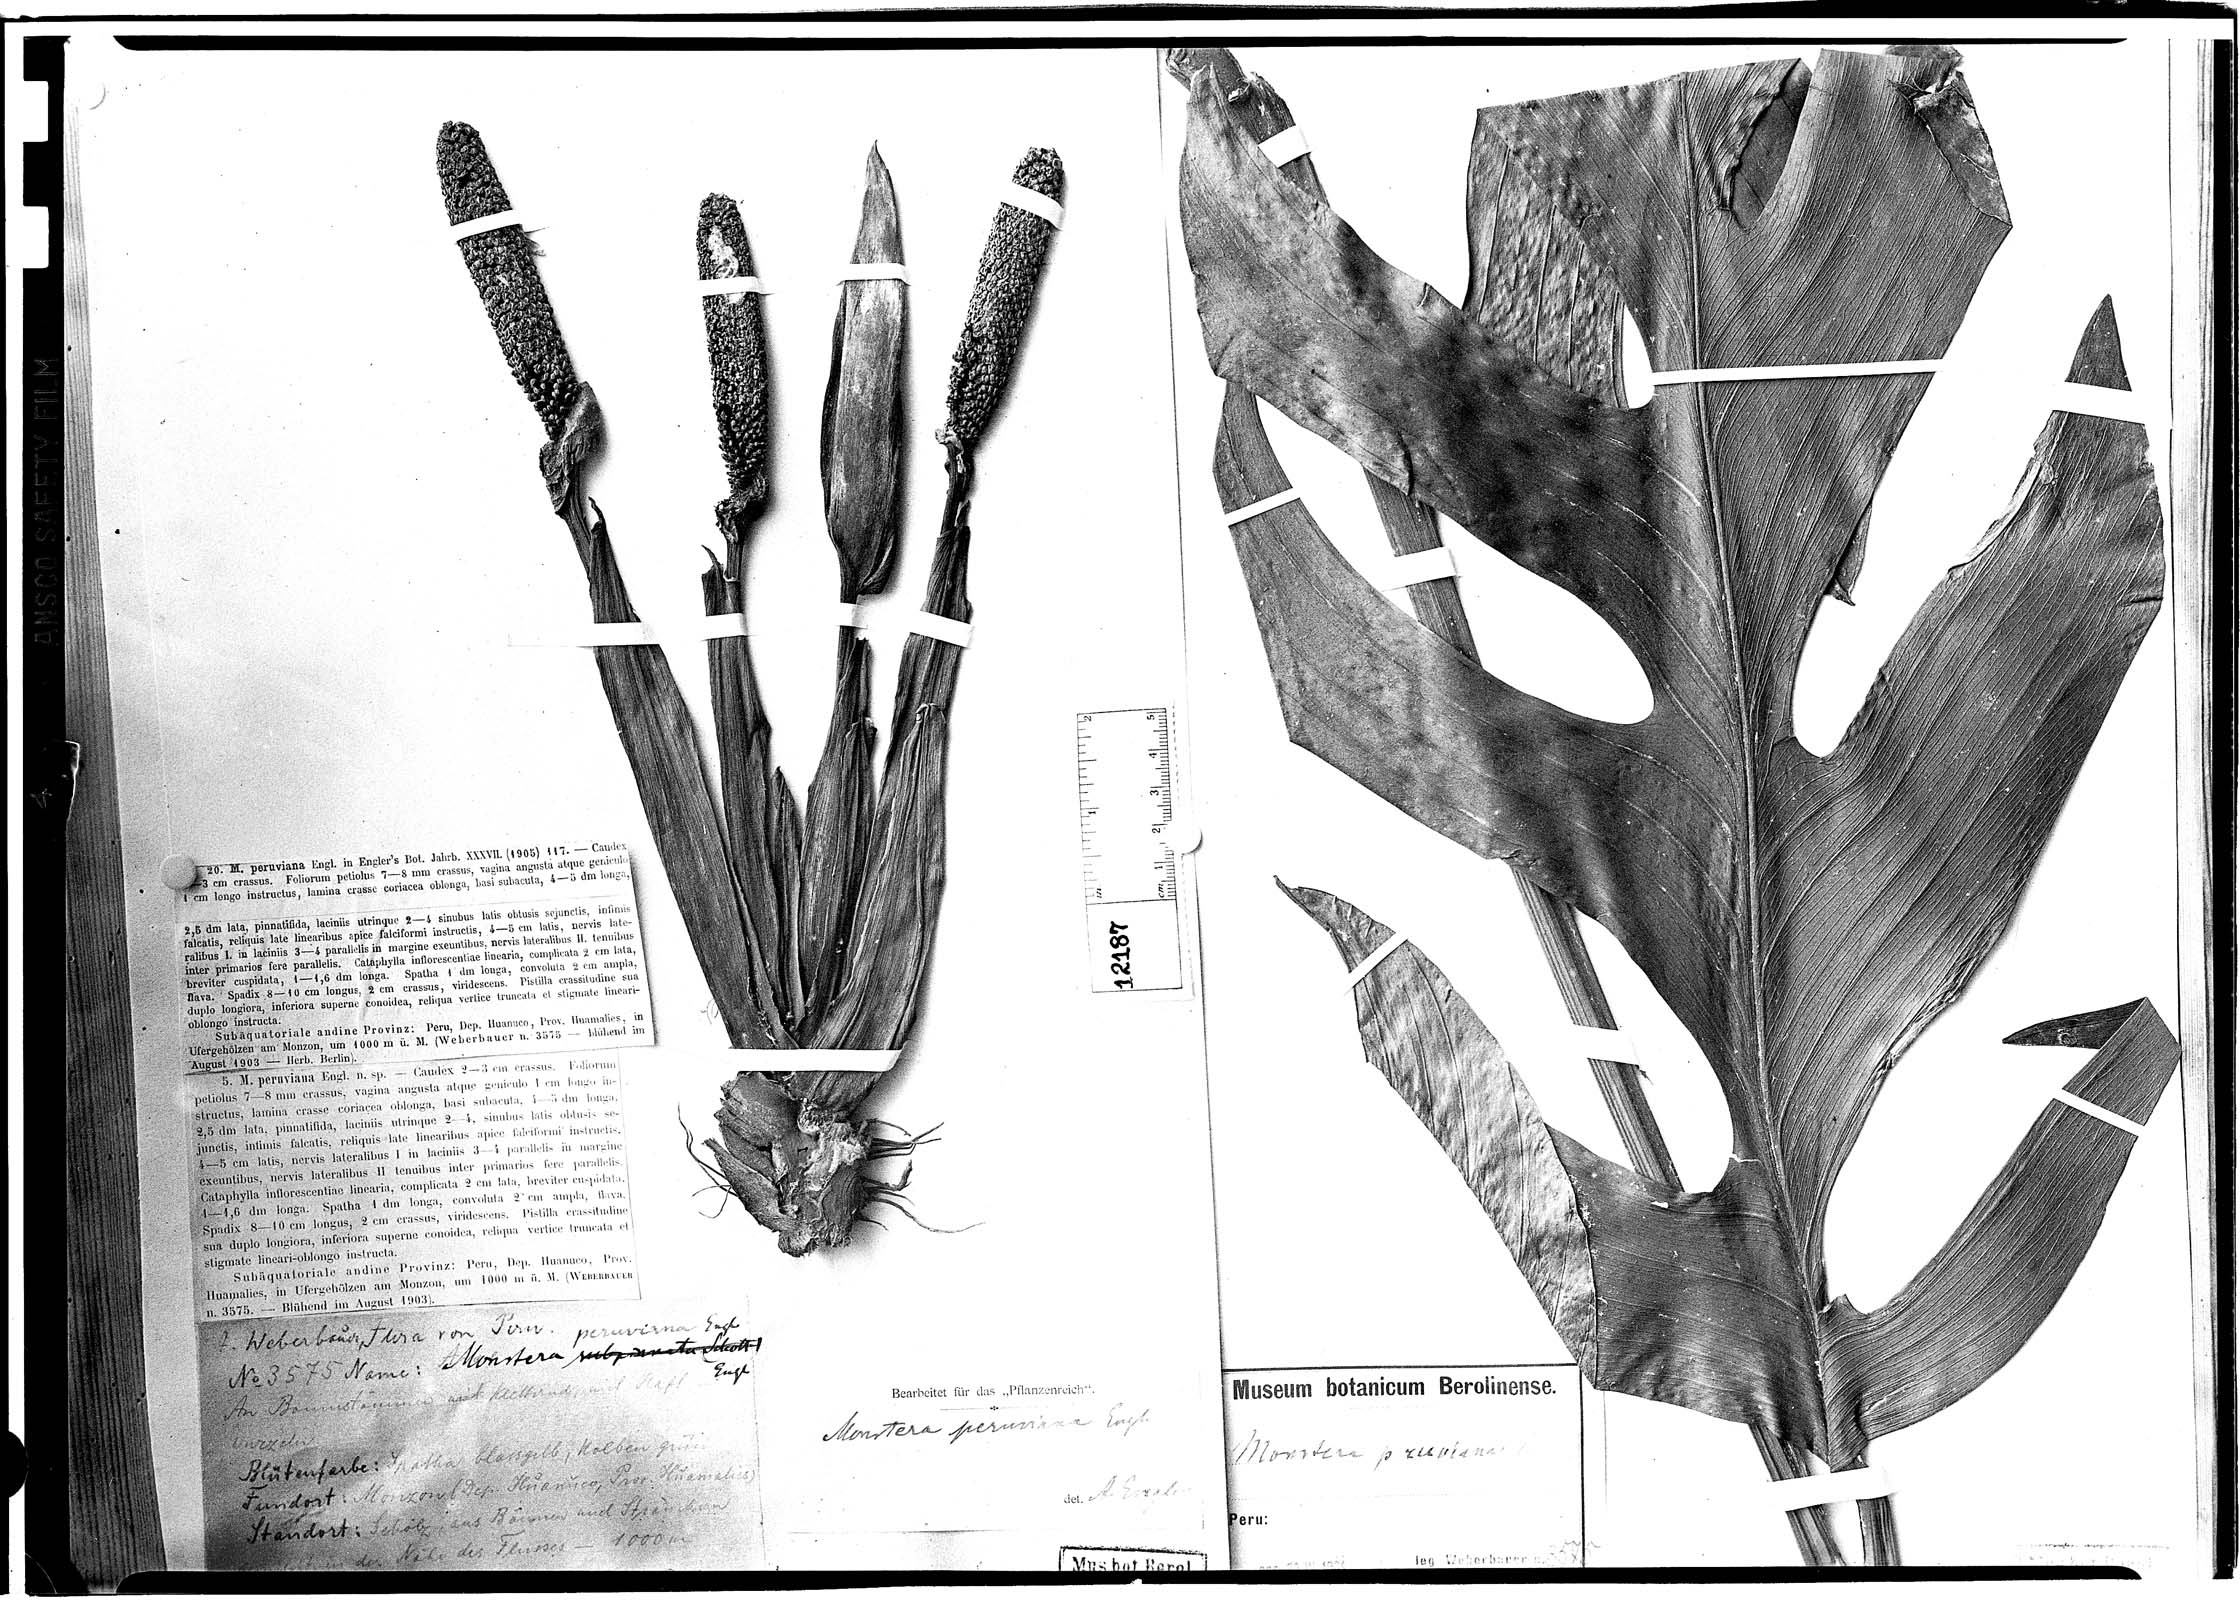 Monstera dissecta image